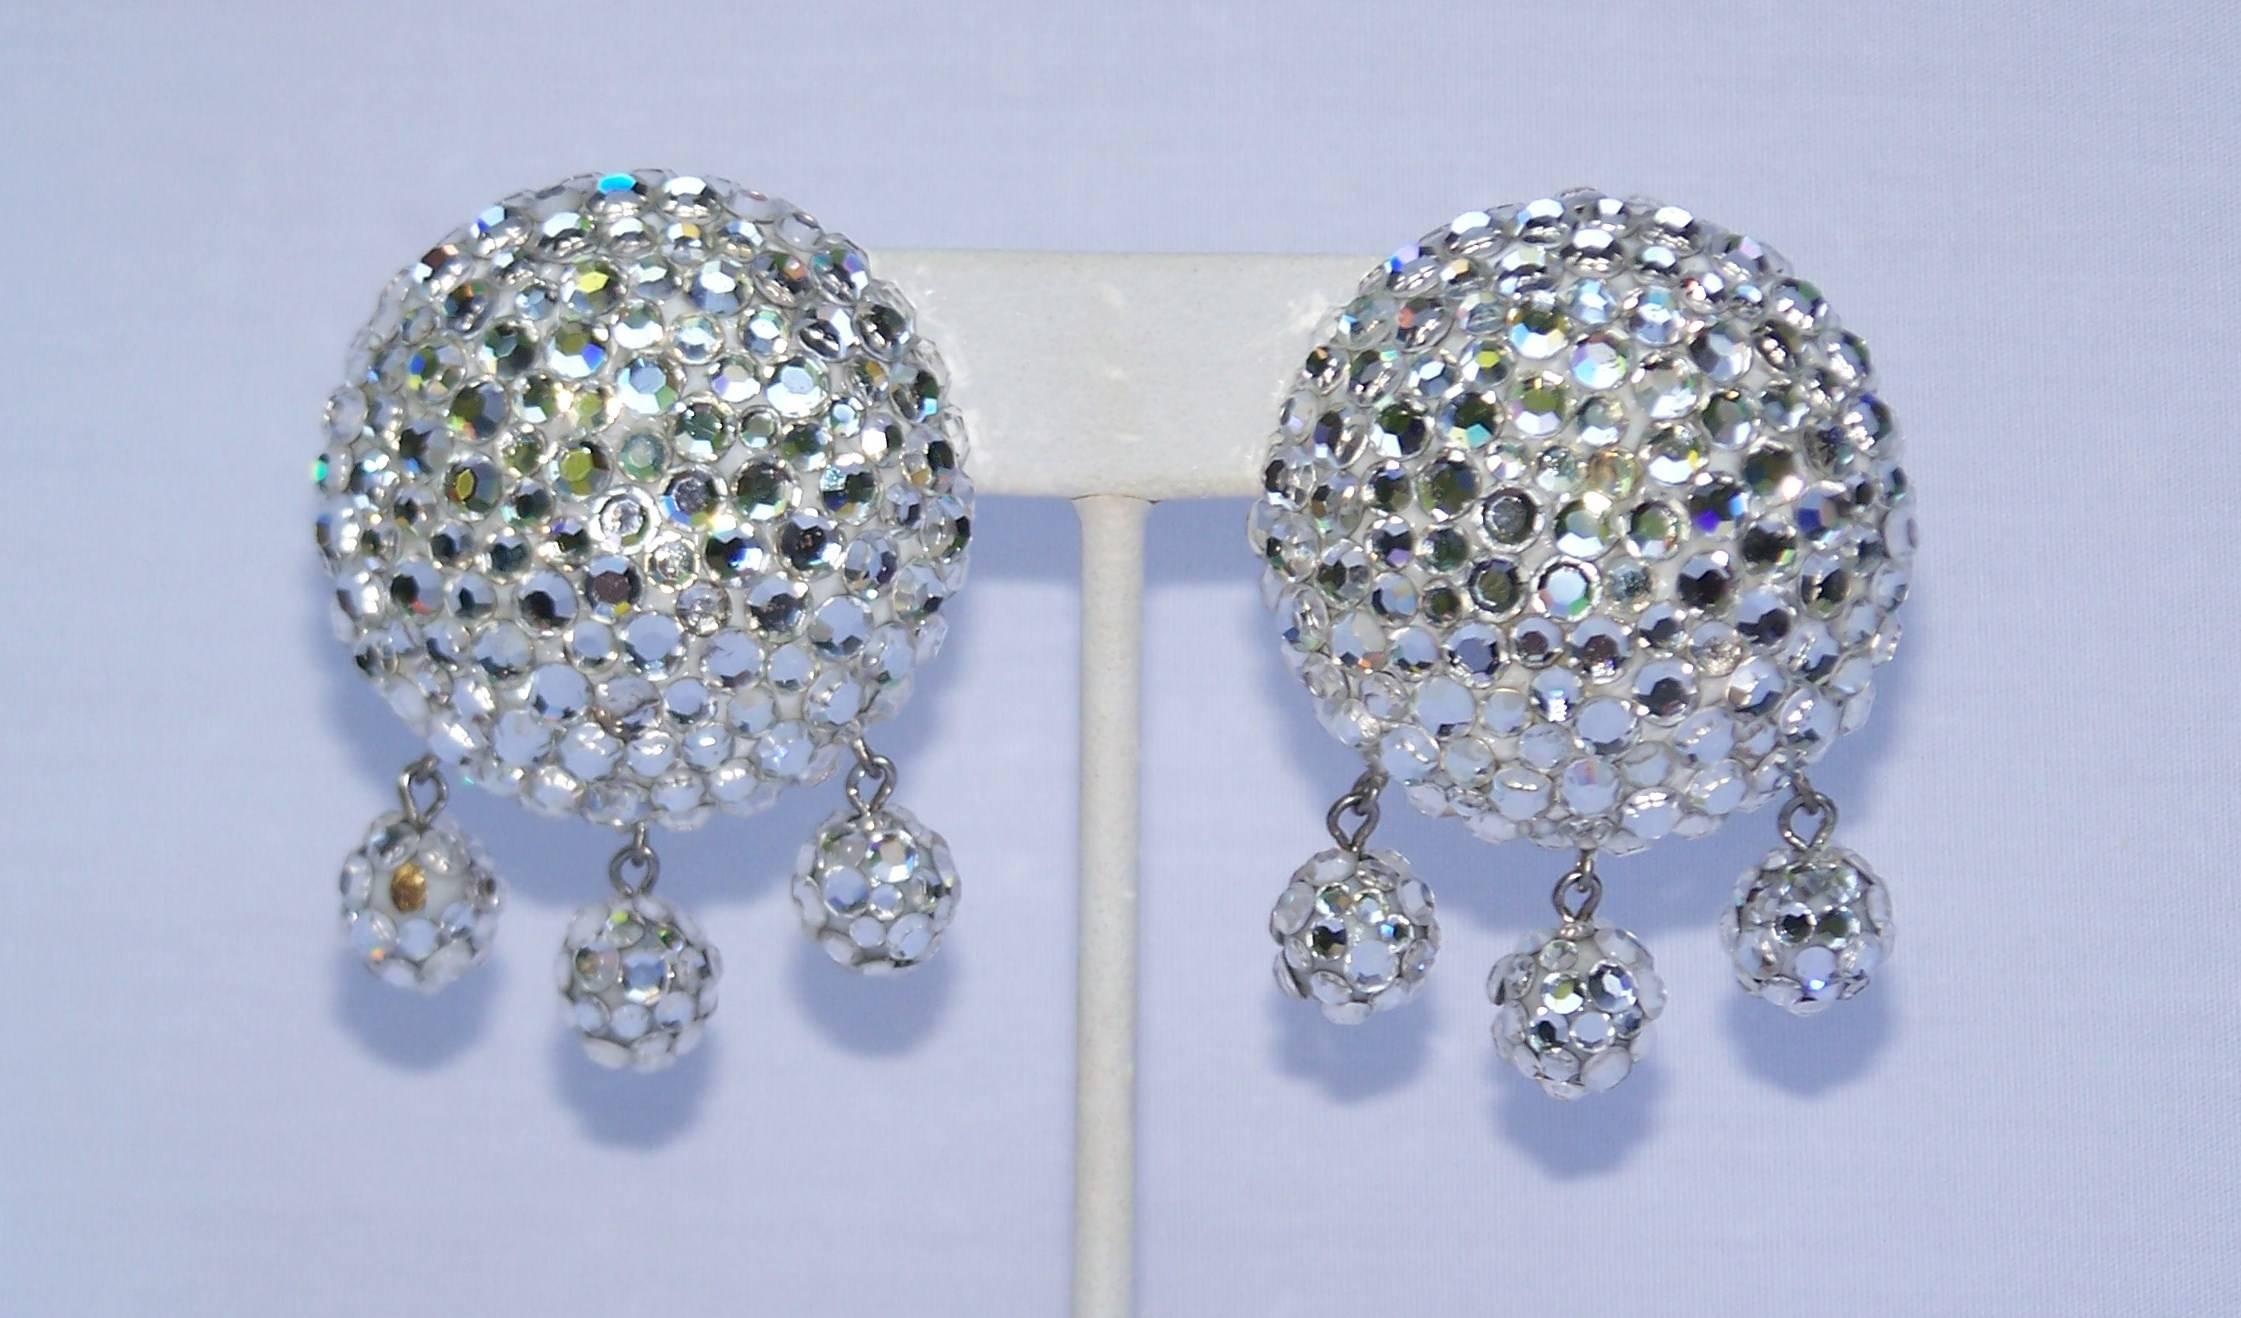 Glitzy, glittery, glammy ... all appropriate adjectives to describe these fun pave crystal encrusted earrings by James Arpad.  Each bauble is like a disco ball for the ears with a flat clip on back and three dangling small balls to move and catch